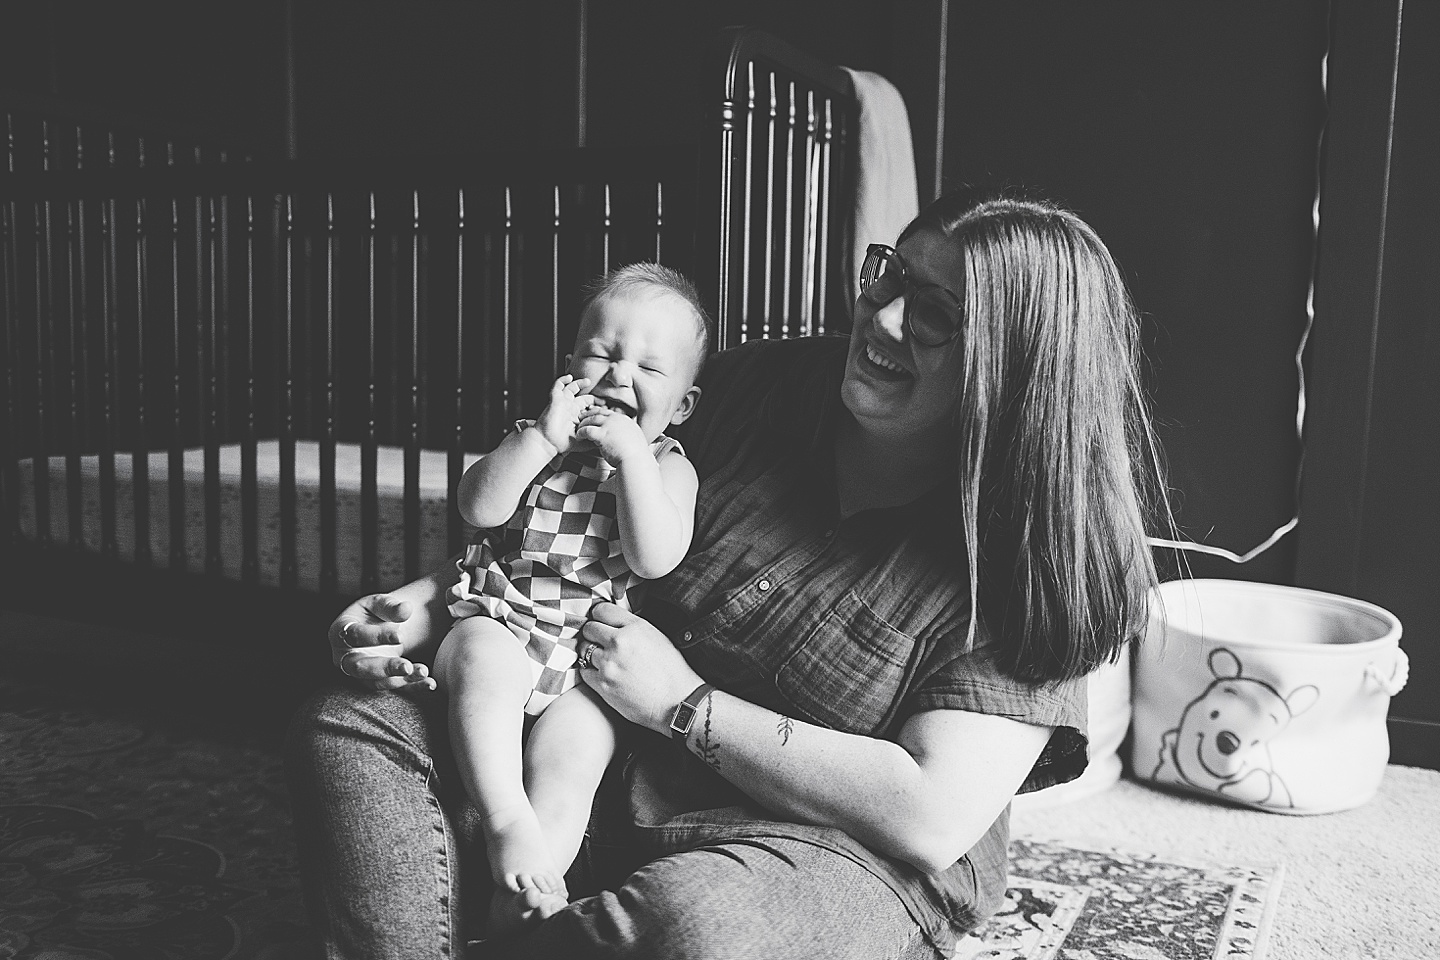 Black and white photo of baby smiling